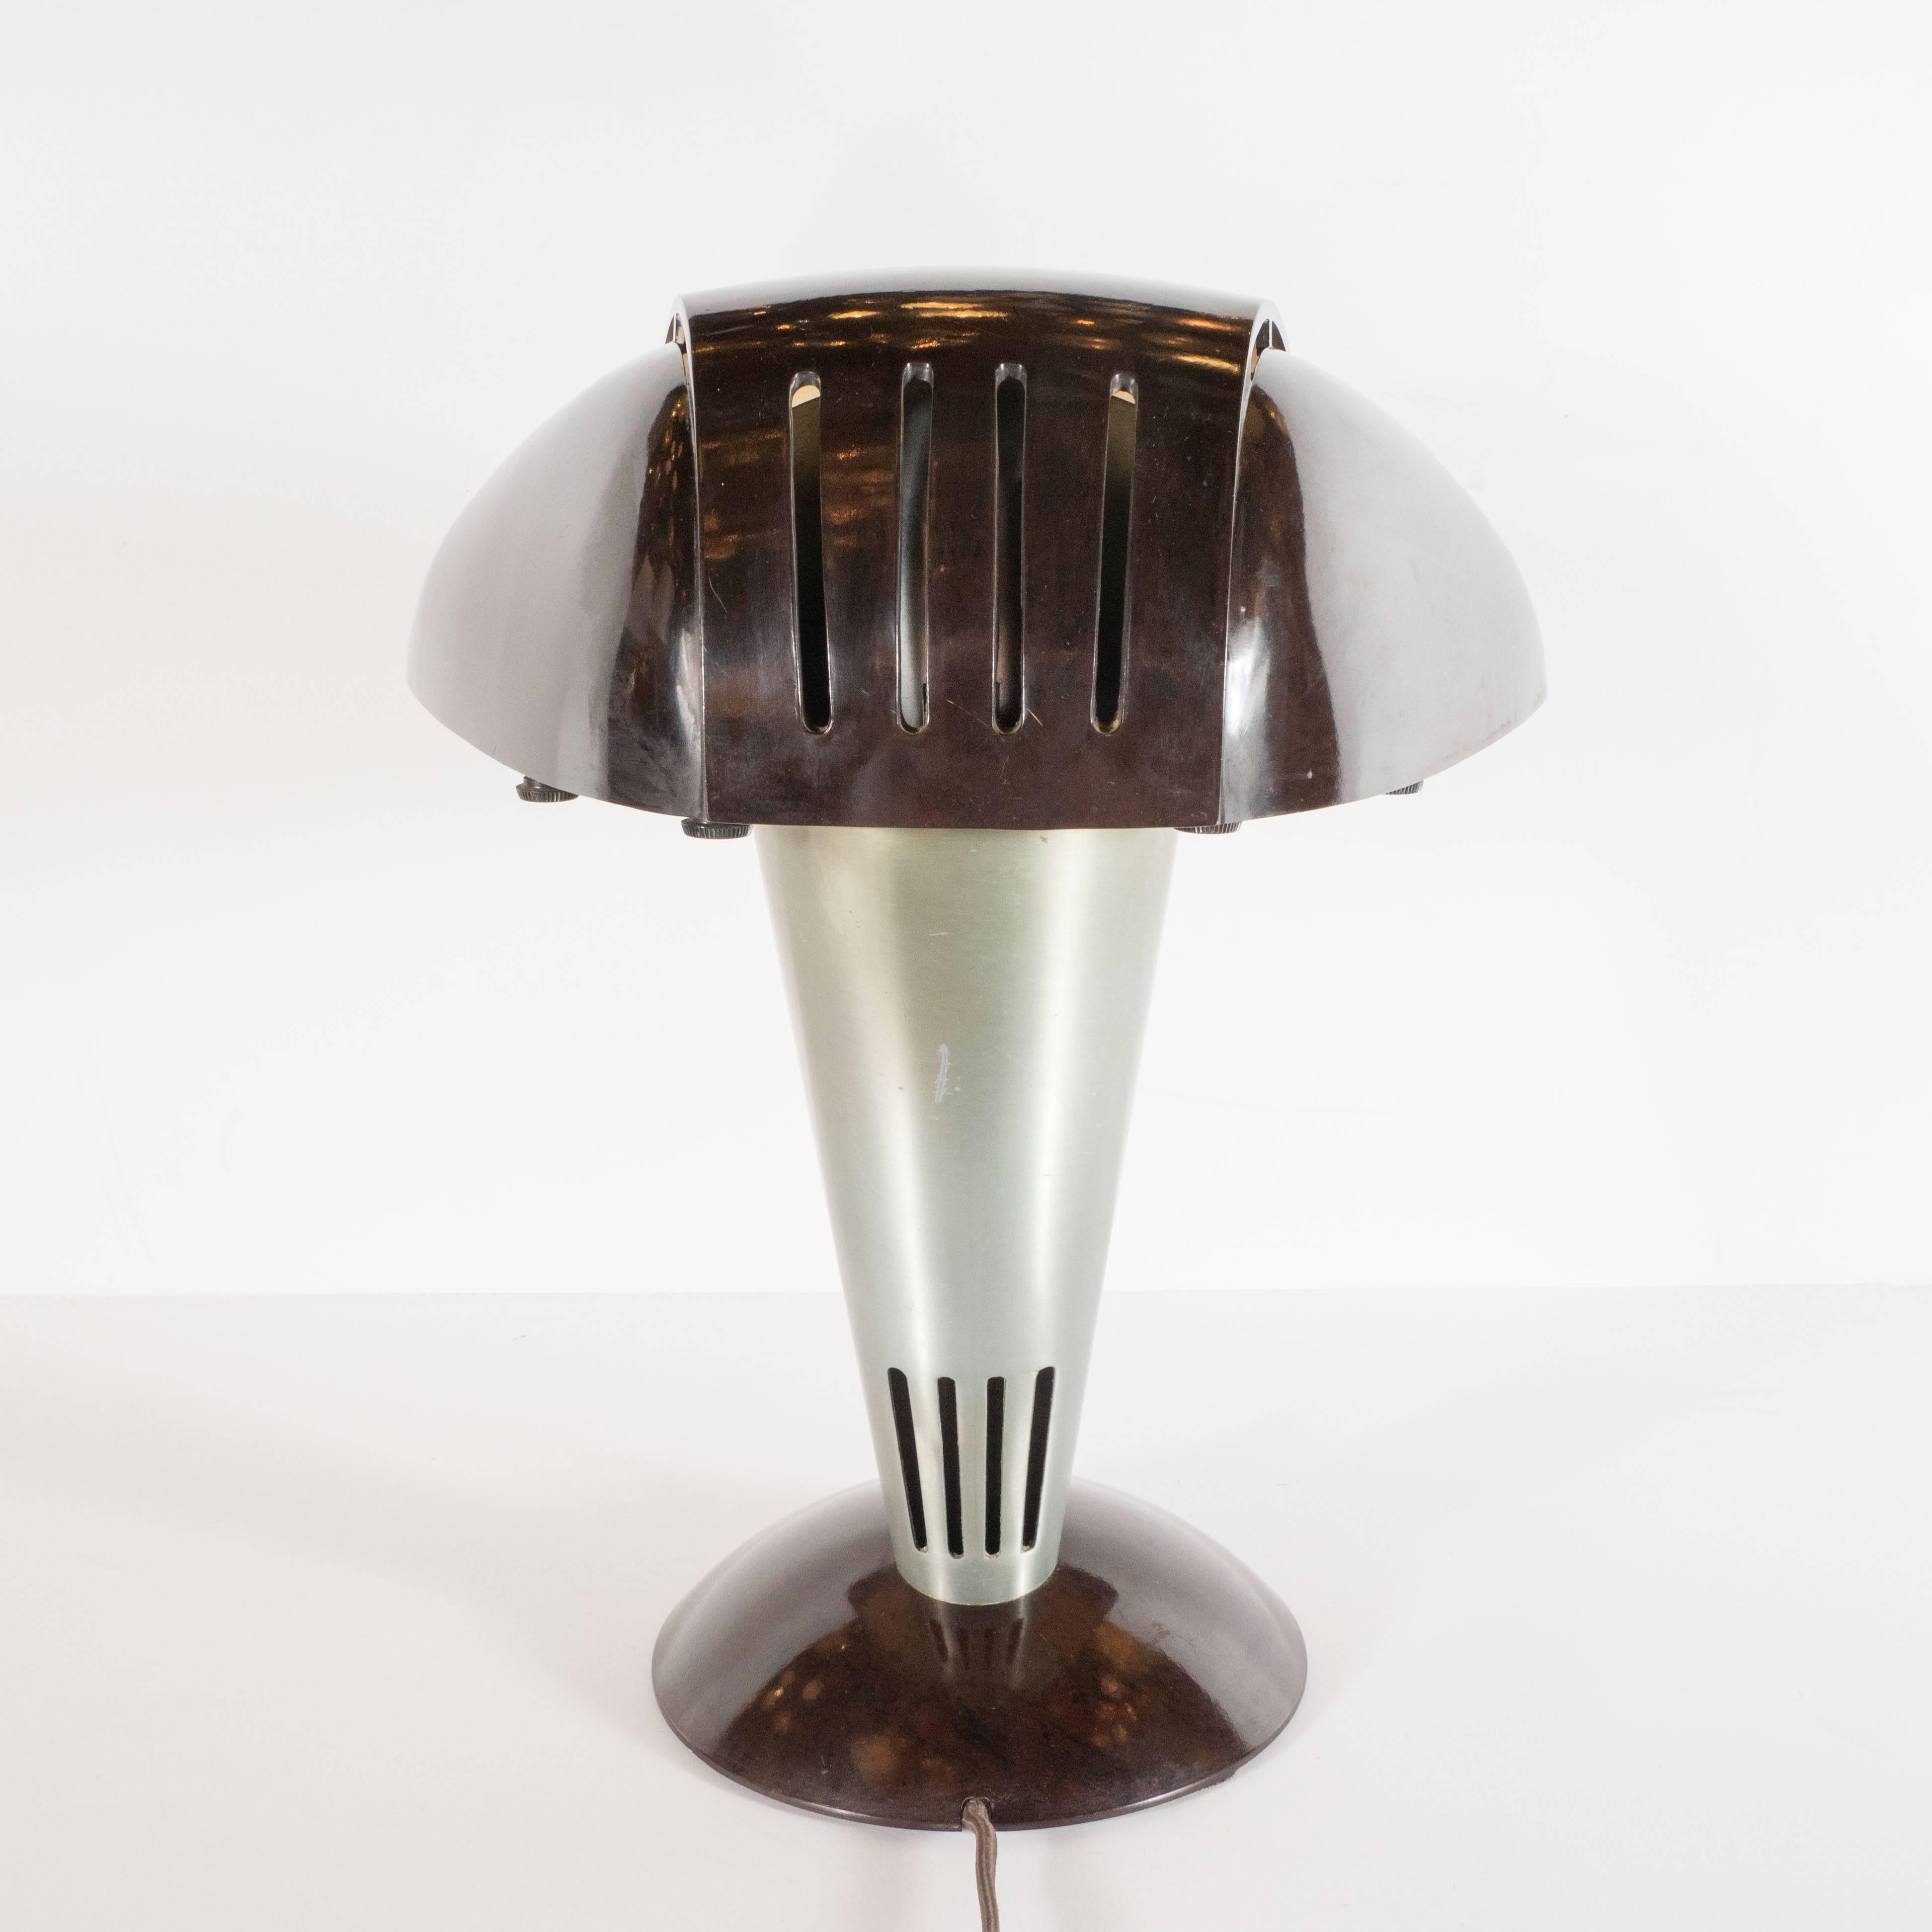 This graphic and iconic desk lamp was realized by the esteemed American designer Walter Dorwin Teague in America, circa 1939. It represents one of Teague's most important and celebrated designs. The lamp features a streamlined domed skyscraper style